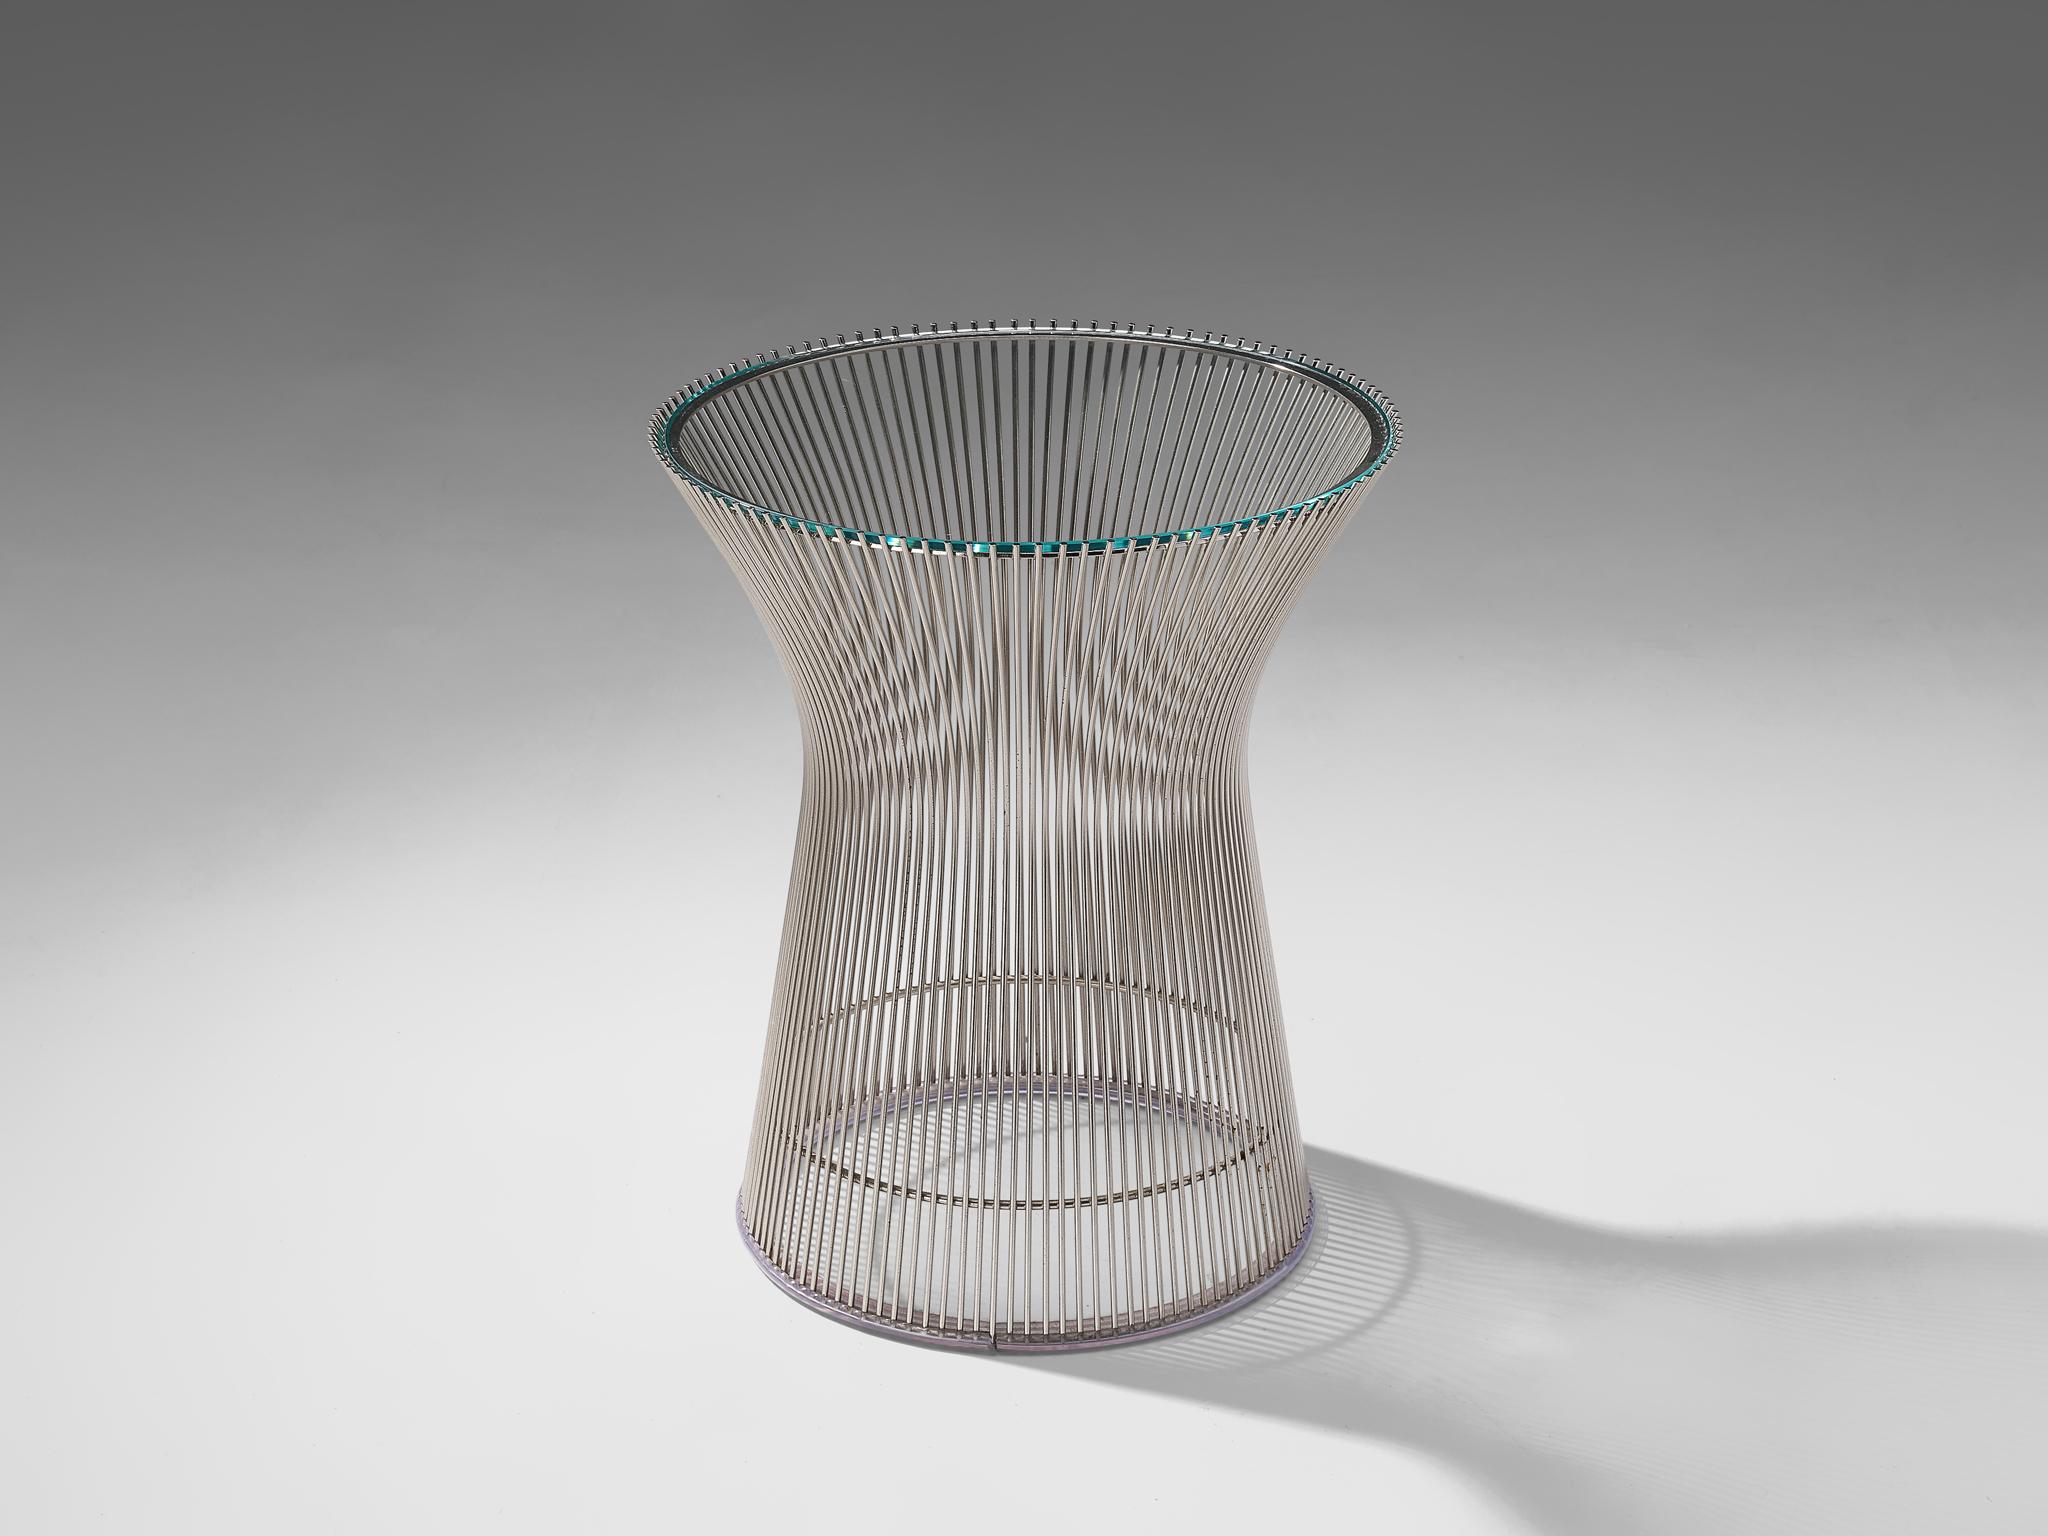 Warren Platner for Knoll International, coffee table, glass, metal, United States, design 1966, later production

This iconic side table by Warren Platner is created by welding curved steel rods to circular and semi-circular frames, simultaneously